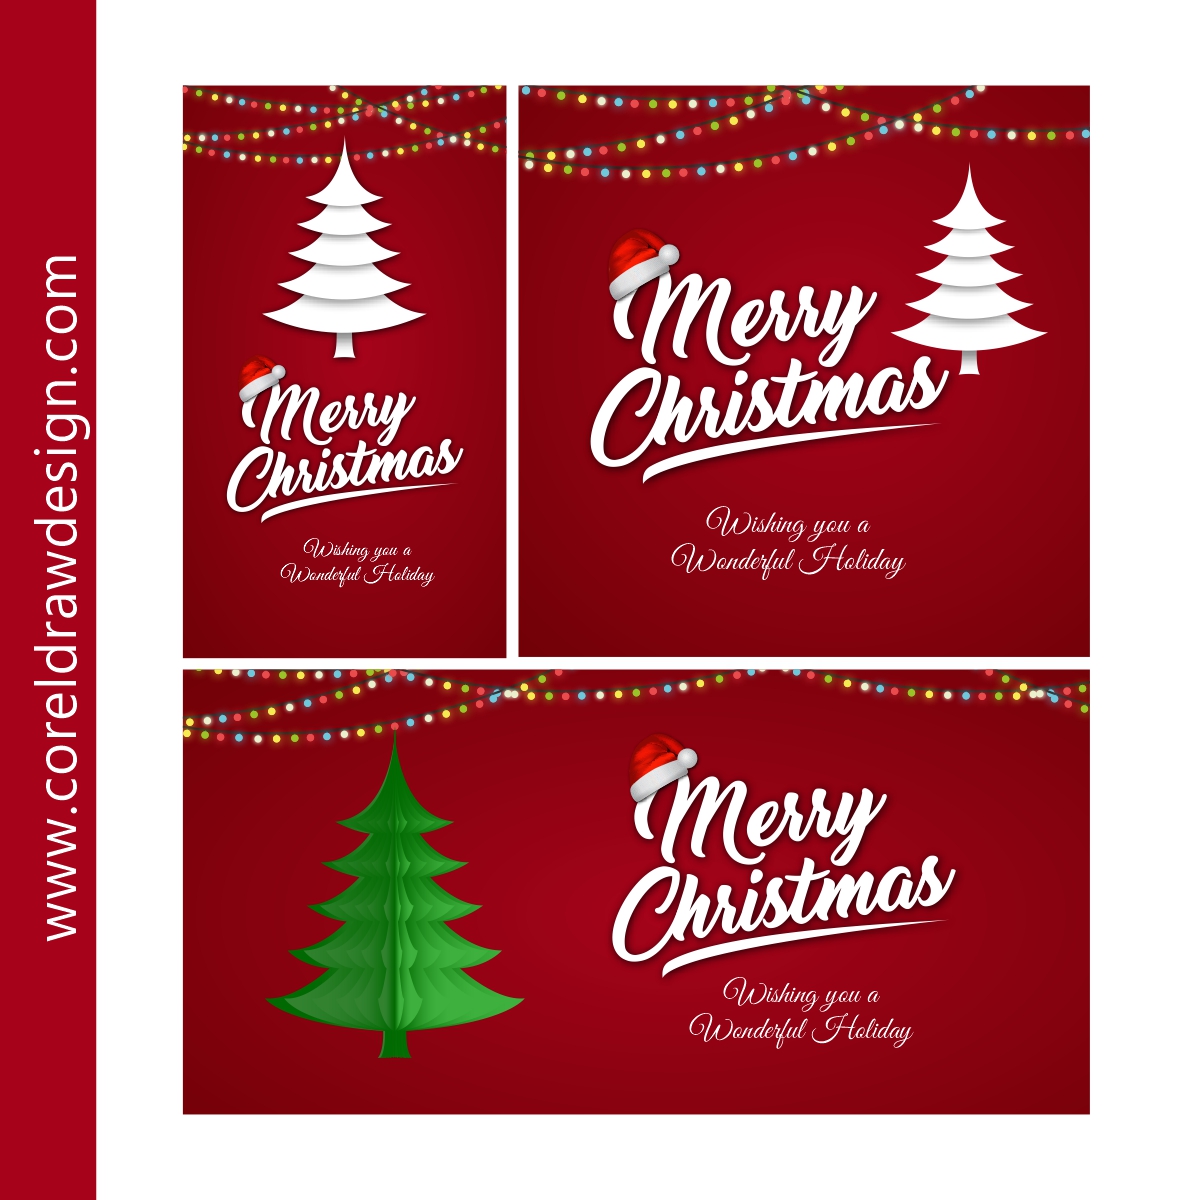 Christmas Banners Collection with Tree & Lights Free CDR